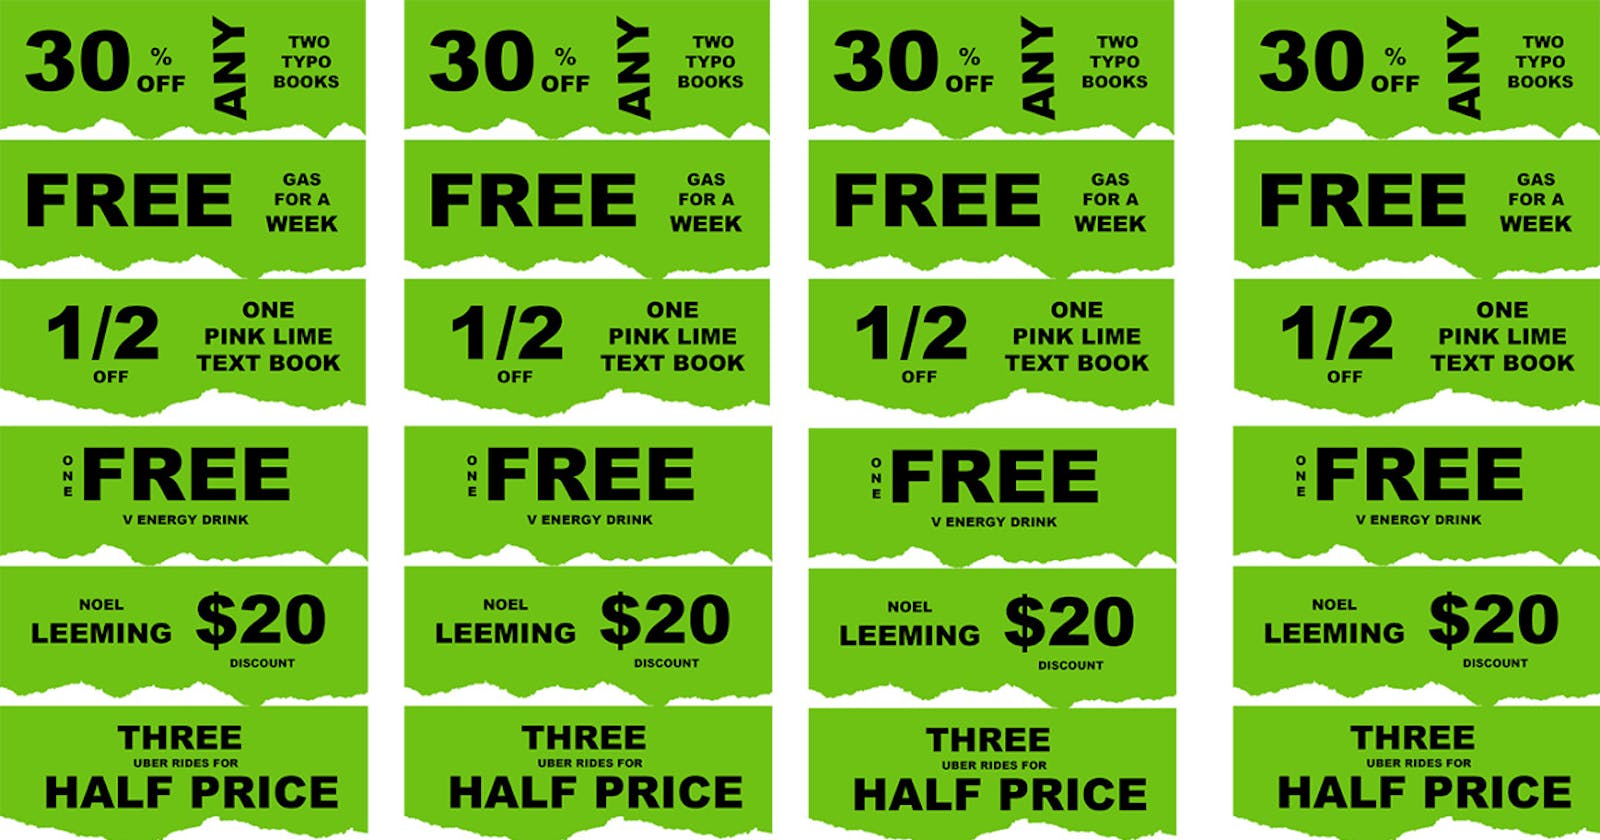 Some of the fake coupons